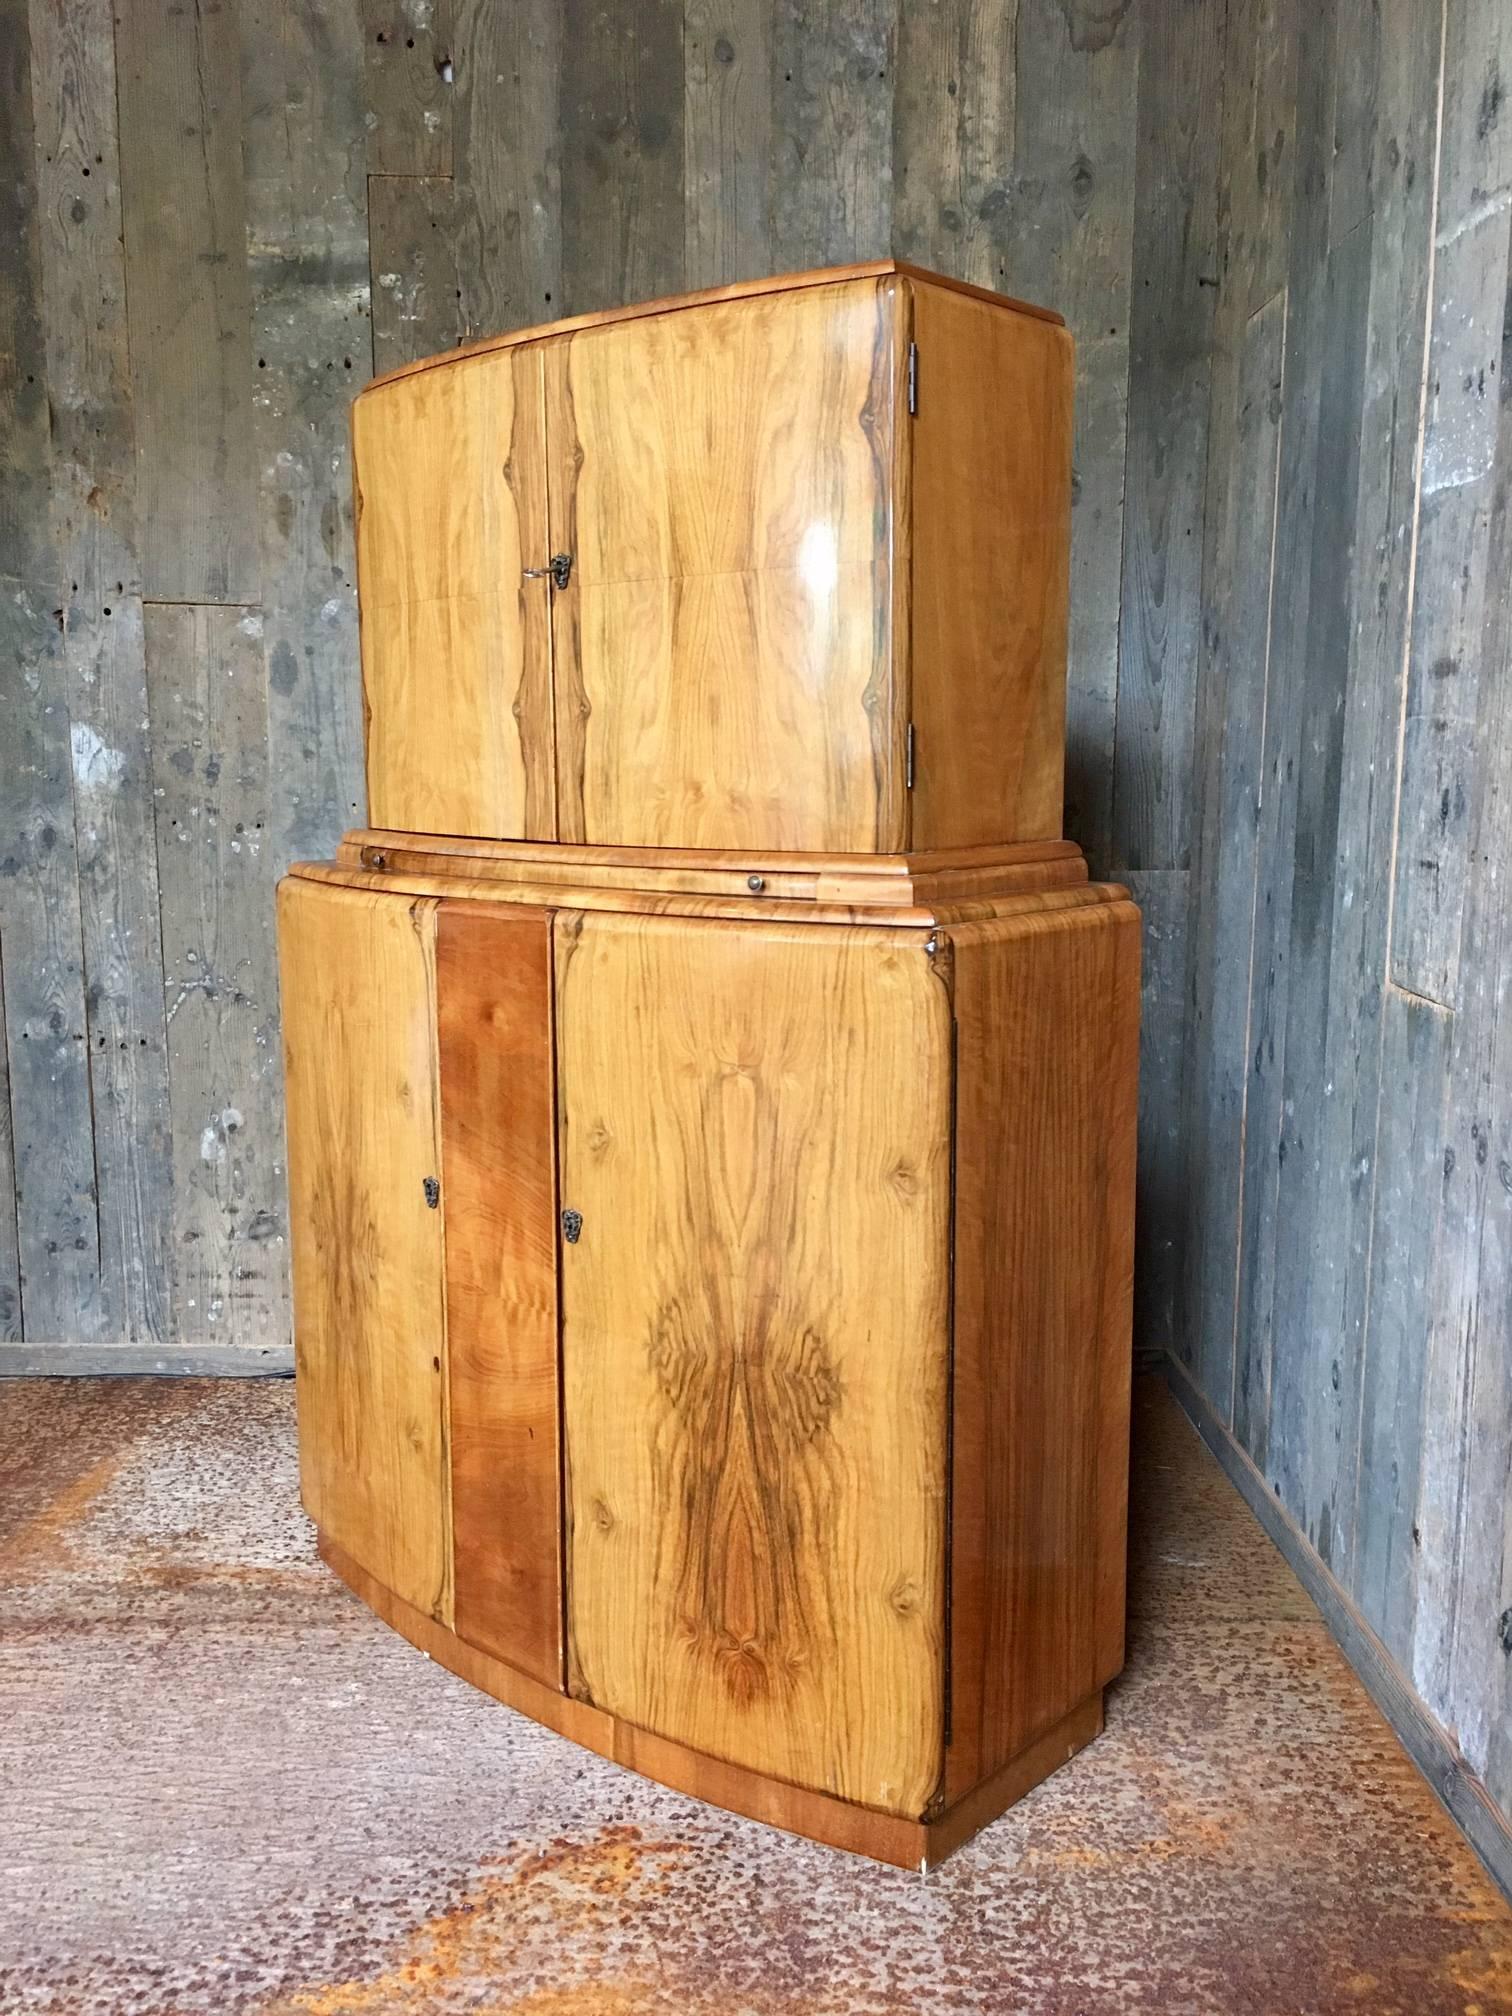 Beautiful cocktail cabinet in Art Deco style made in the 1950s by Rivington London. The cabinet is made from wood with a juglans veneer finish. The cabinet has four doors. The upper interior is covered with mirrors and a lamp lights up when opening